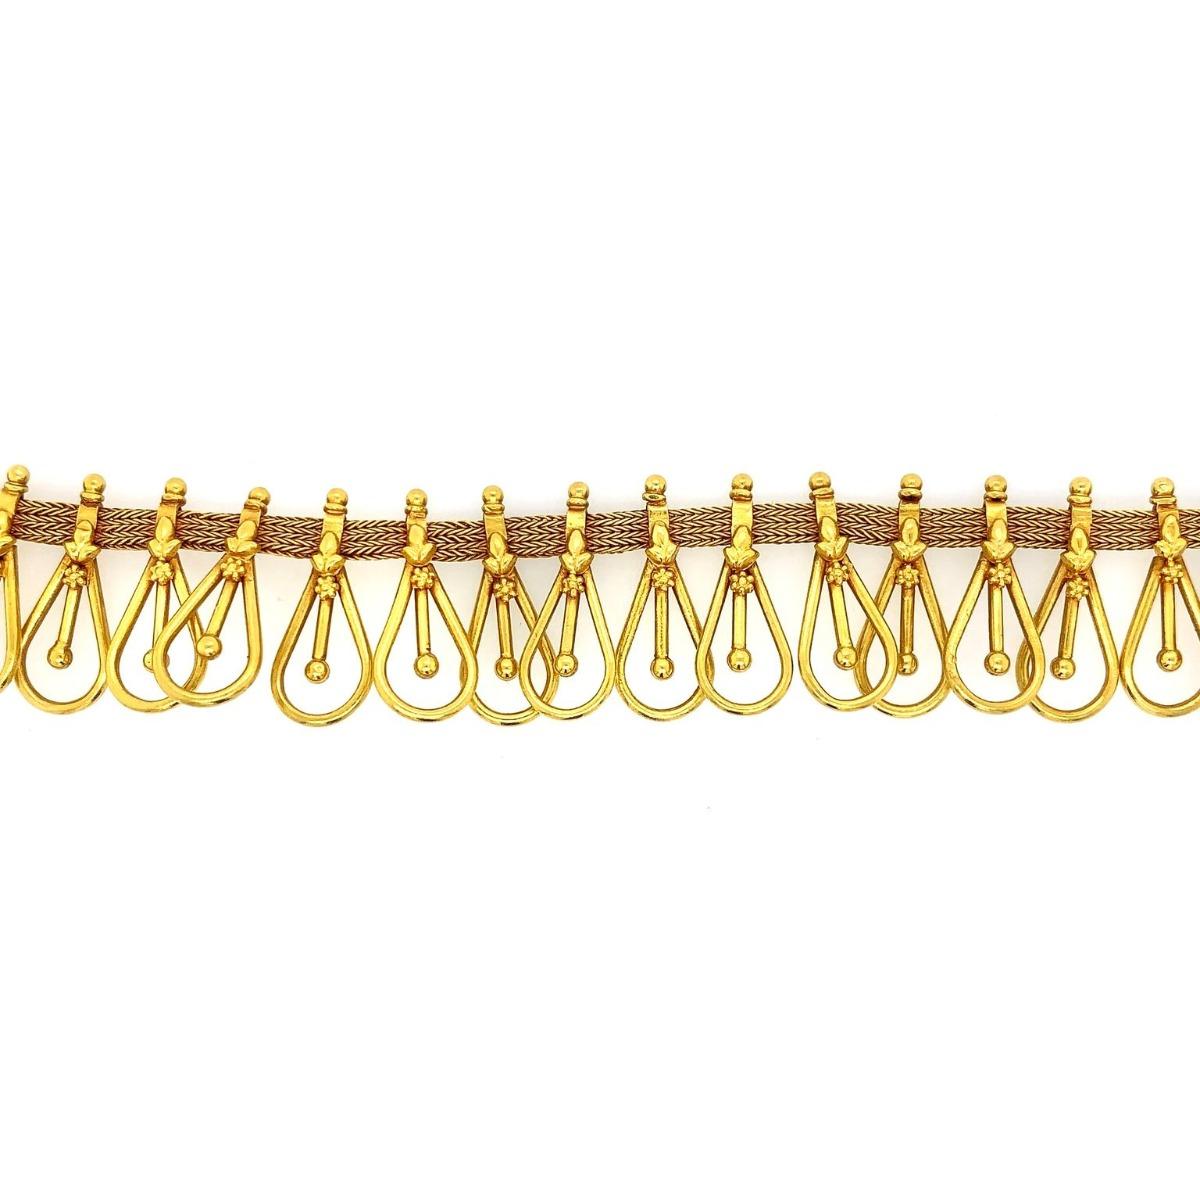 Designer: Lalaounis
Metal: 22k Yellow Gold
Condition: Excellent
Year Of Manufacture: Circa 1980s
Length: 14.82 inches
Total Item Weight: 48.4 g